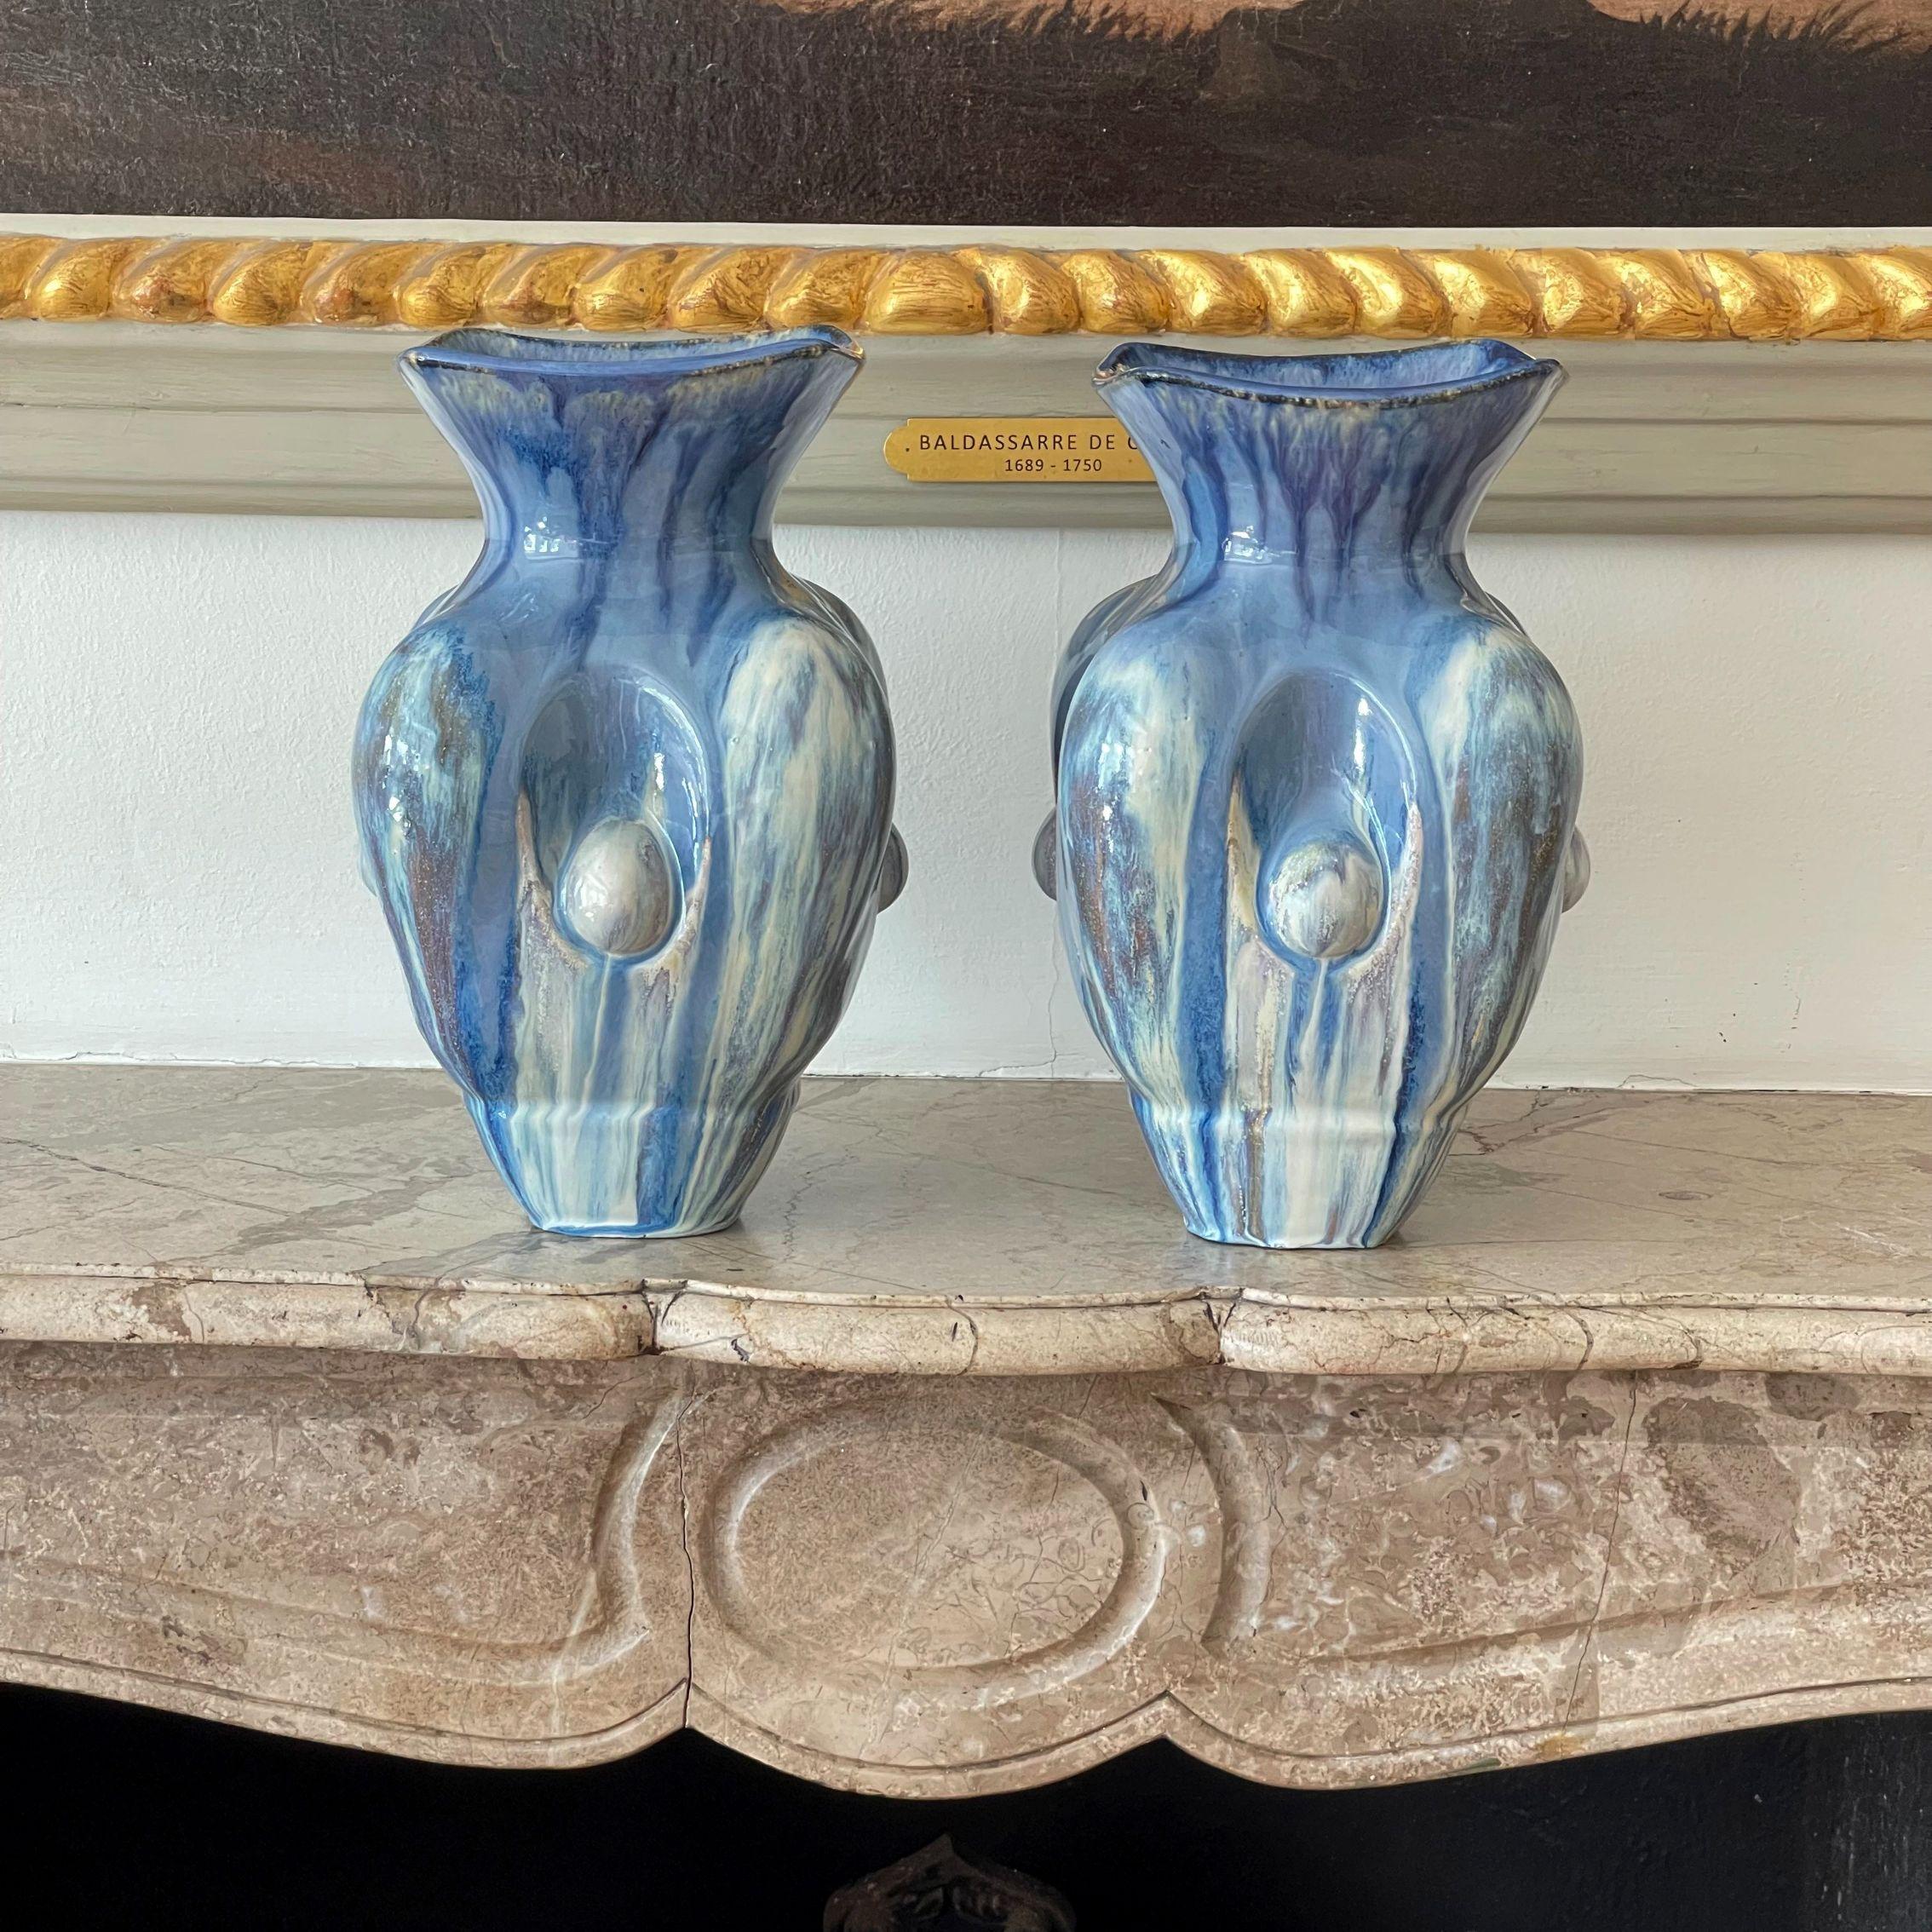 Violante Lodolo D'Oria, pair of sky blue squarish vases with niches, 2022, glazed stoneware, multiple glazes, measures W 17cm x H 28cm.

New stunning pieces created by ceramic artist Violante Lodolo d' Oria. The layering of different glazes